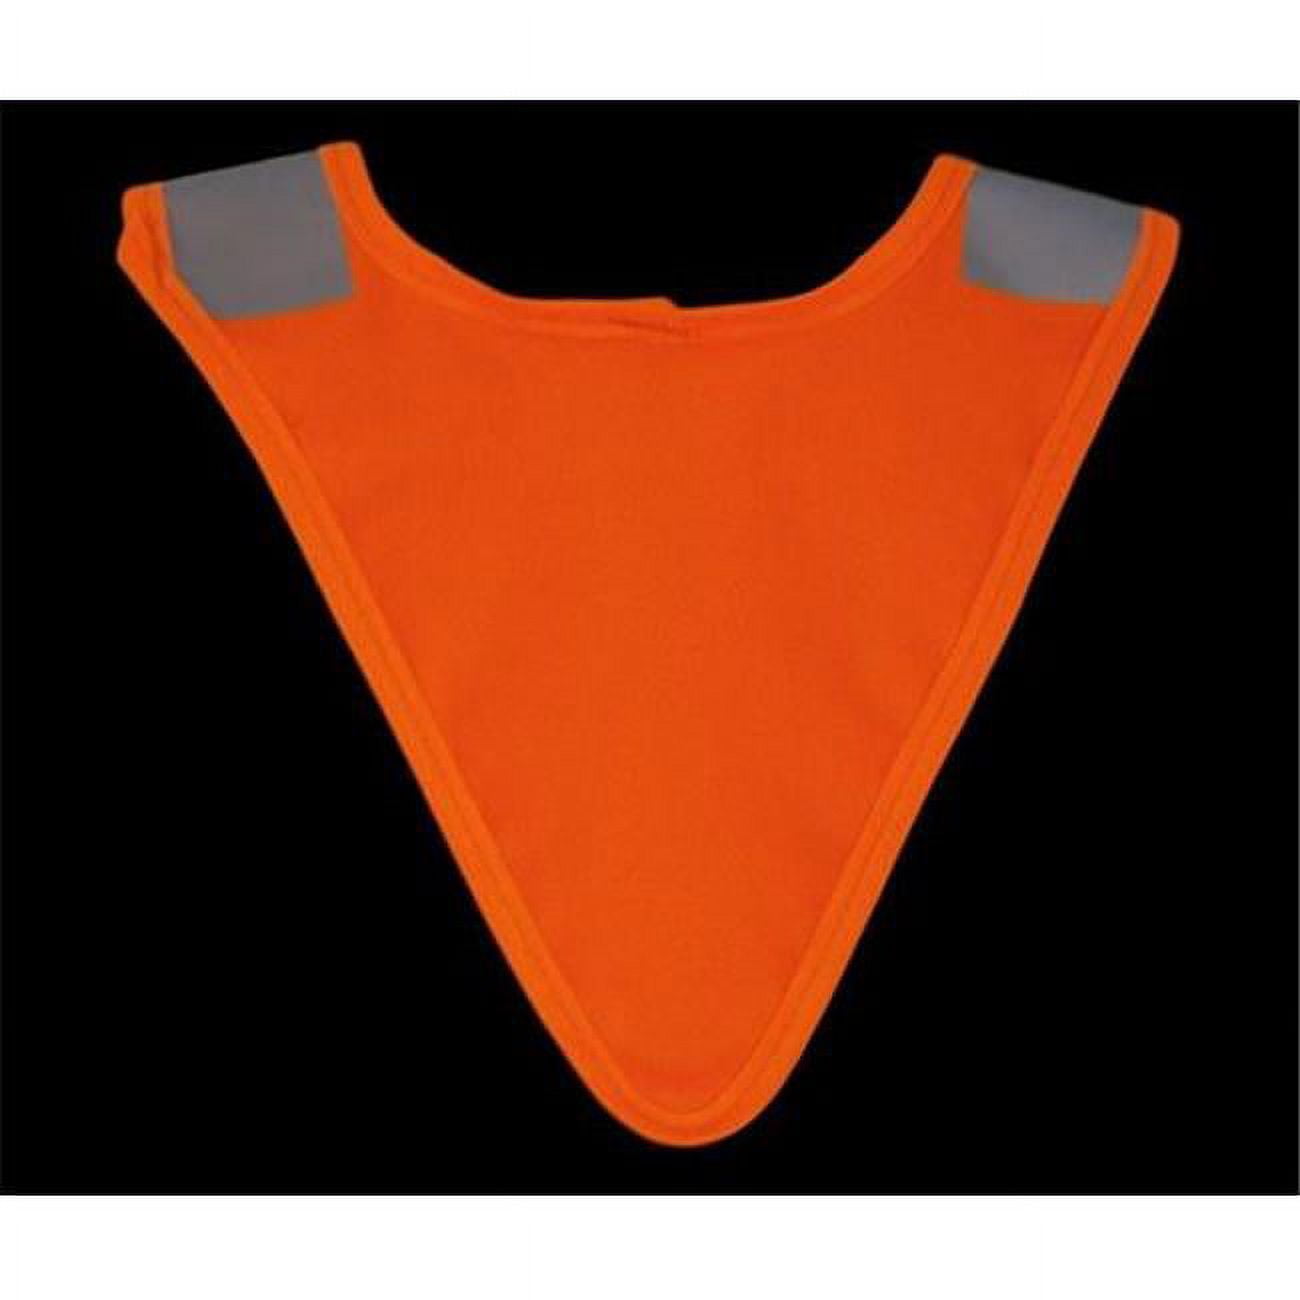 J-cp1000 Childs Crossing Guard Poncho